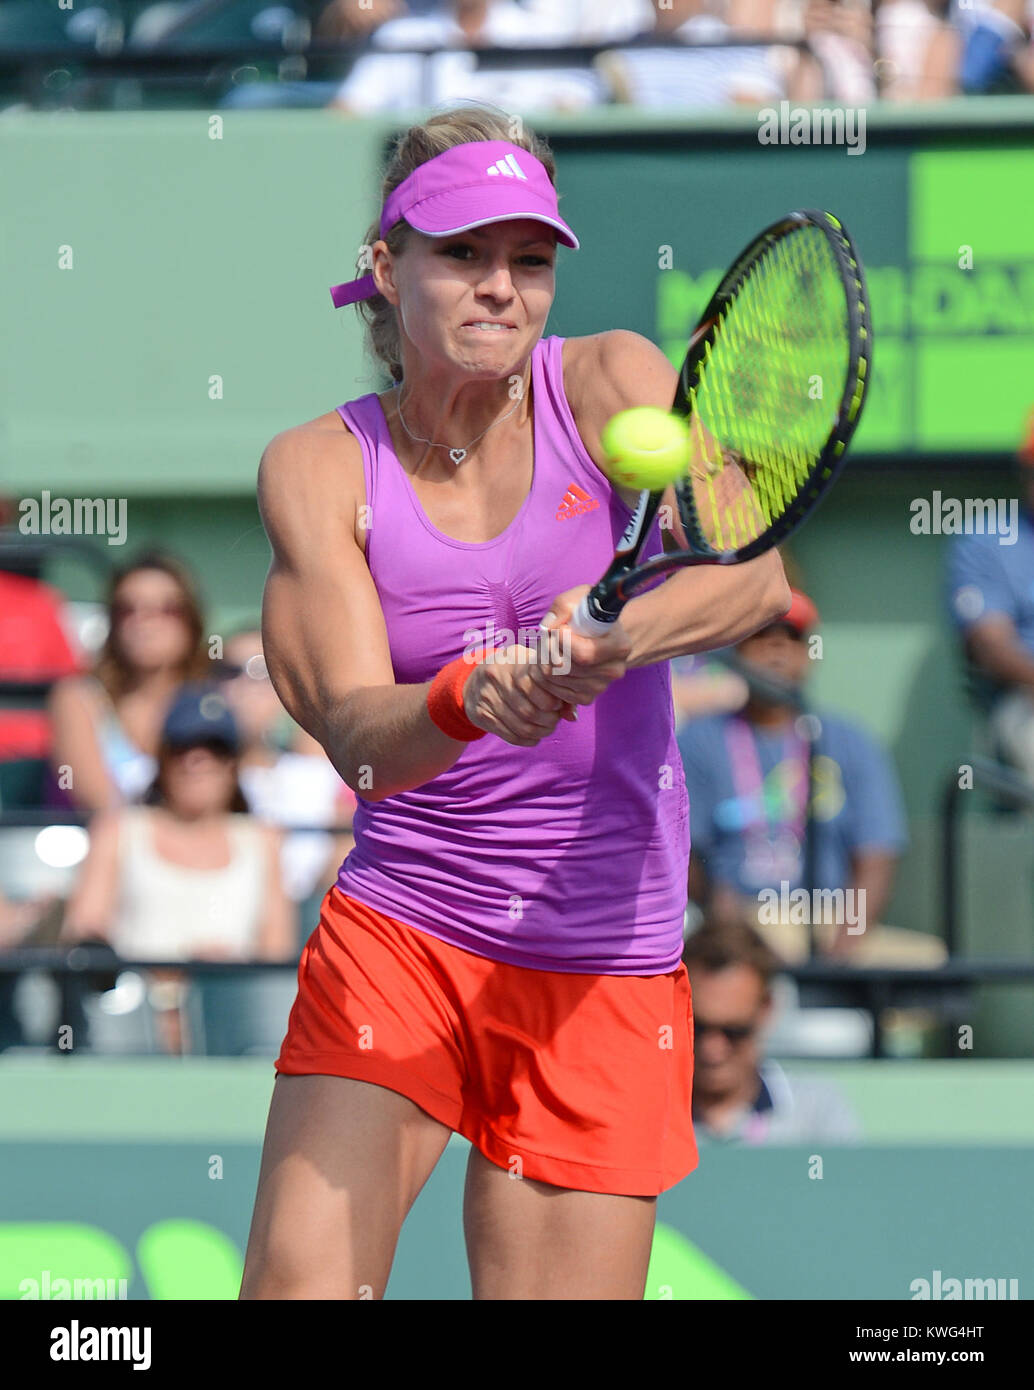 KEY BISCAYNE, FL - MARCH 30: Maria Kirilenko and Nadia Petrova defeat Vania King and Monica Niculescu at the 2012 Sony Ericsson Open at Crandon Park Tennis Center on March 30, 2012 in Key Biscayne, Florida.    People:  Maria Kirilenko Stock Photo